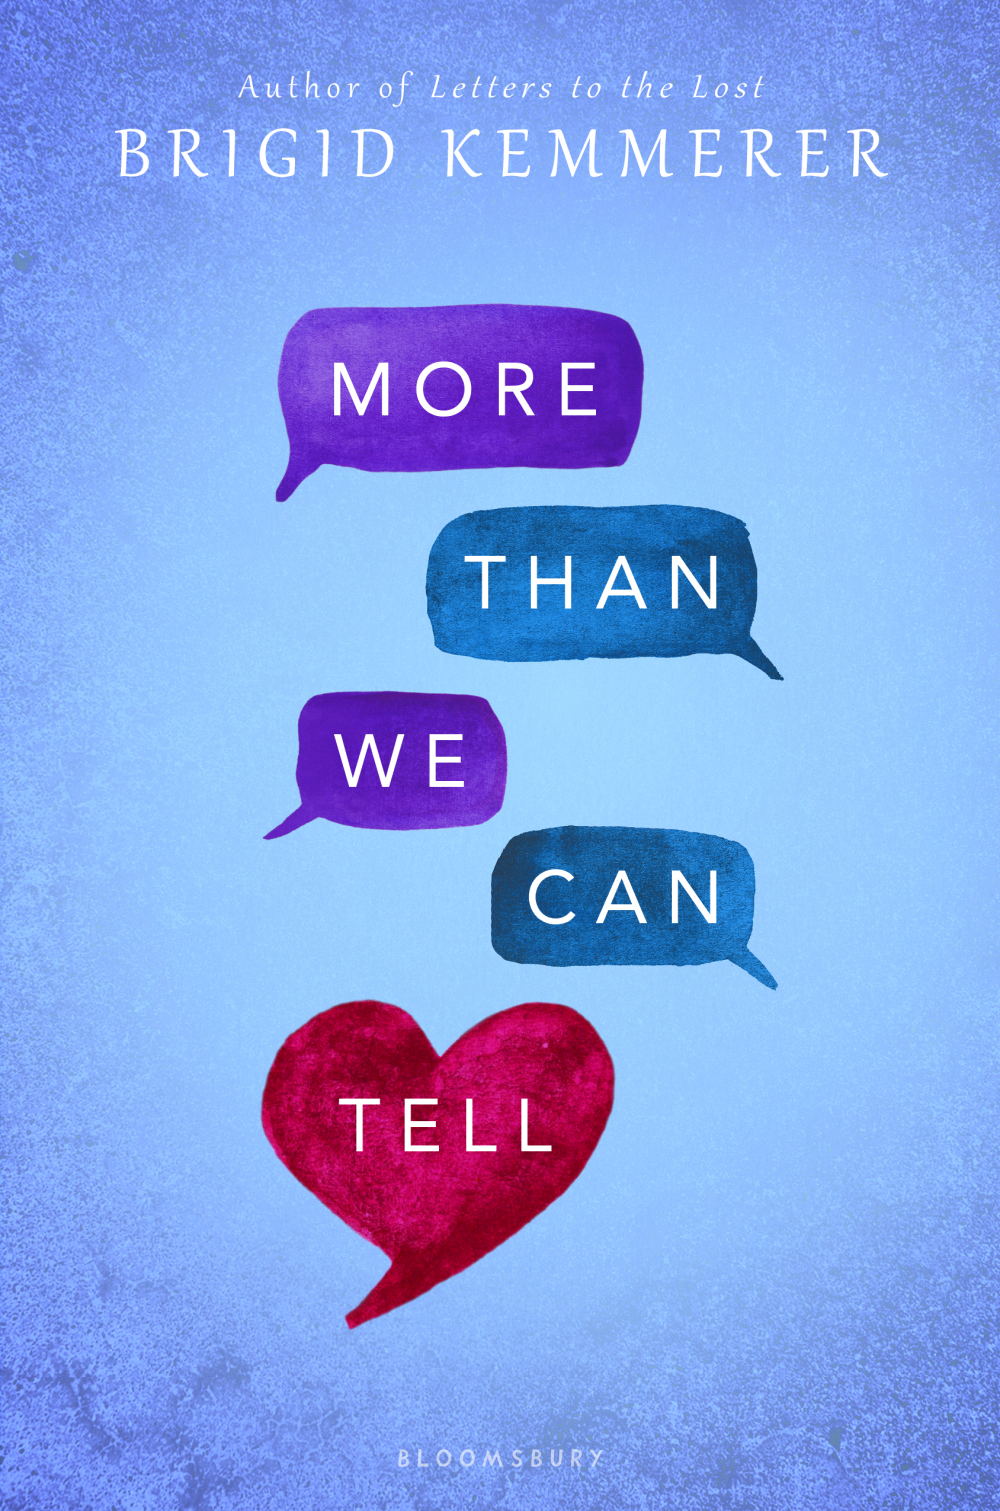 Quote Book: More Than We Can Tell Blog Tour + Giveaway